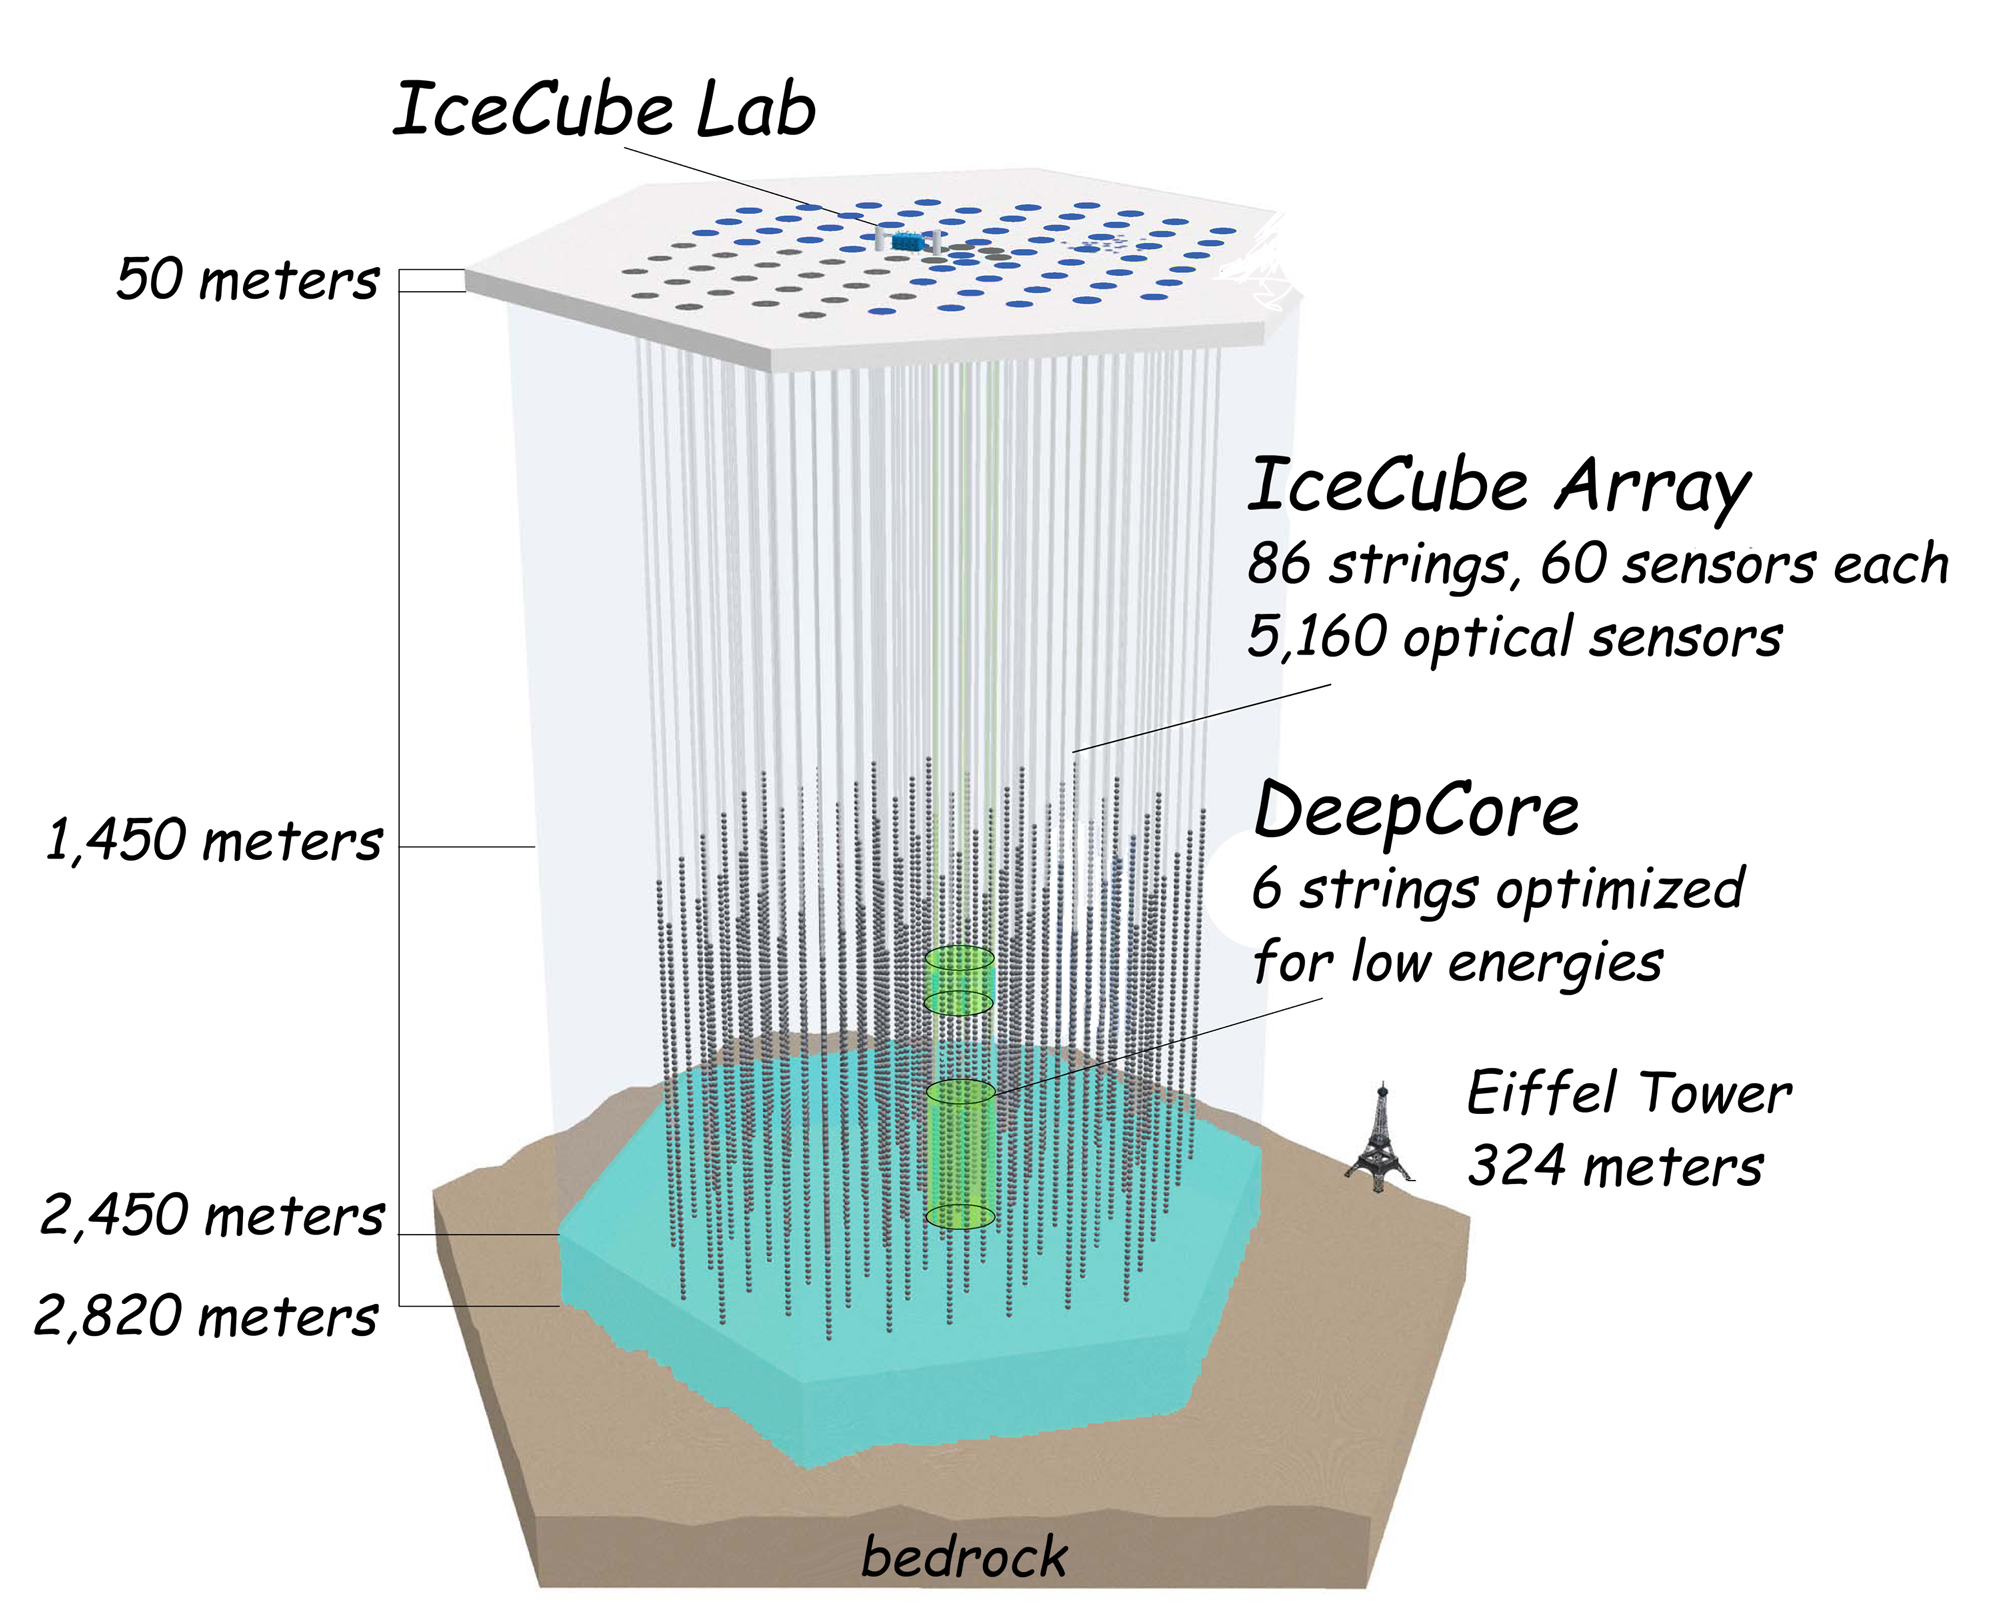 The IceCube neutrino observatory is designed so that 5,160 optical sensors view a cubic kilometer of clear South Polar ice. 